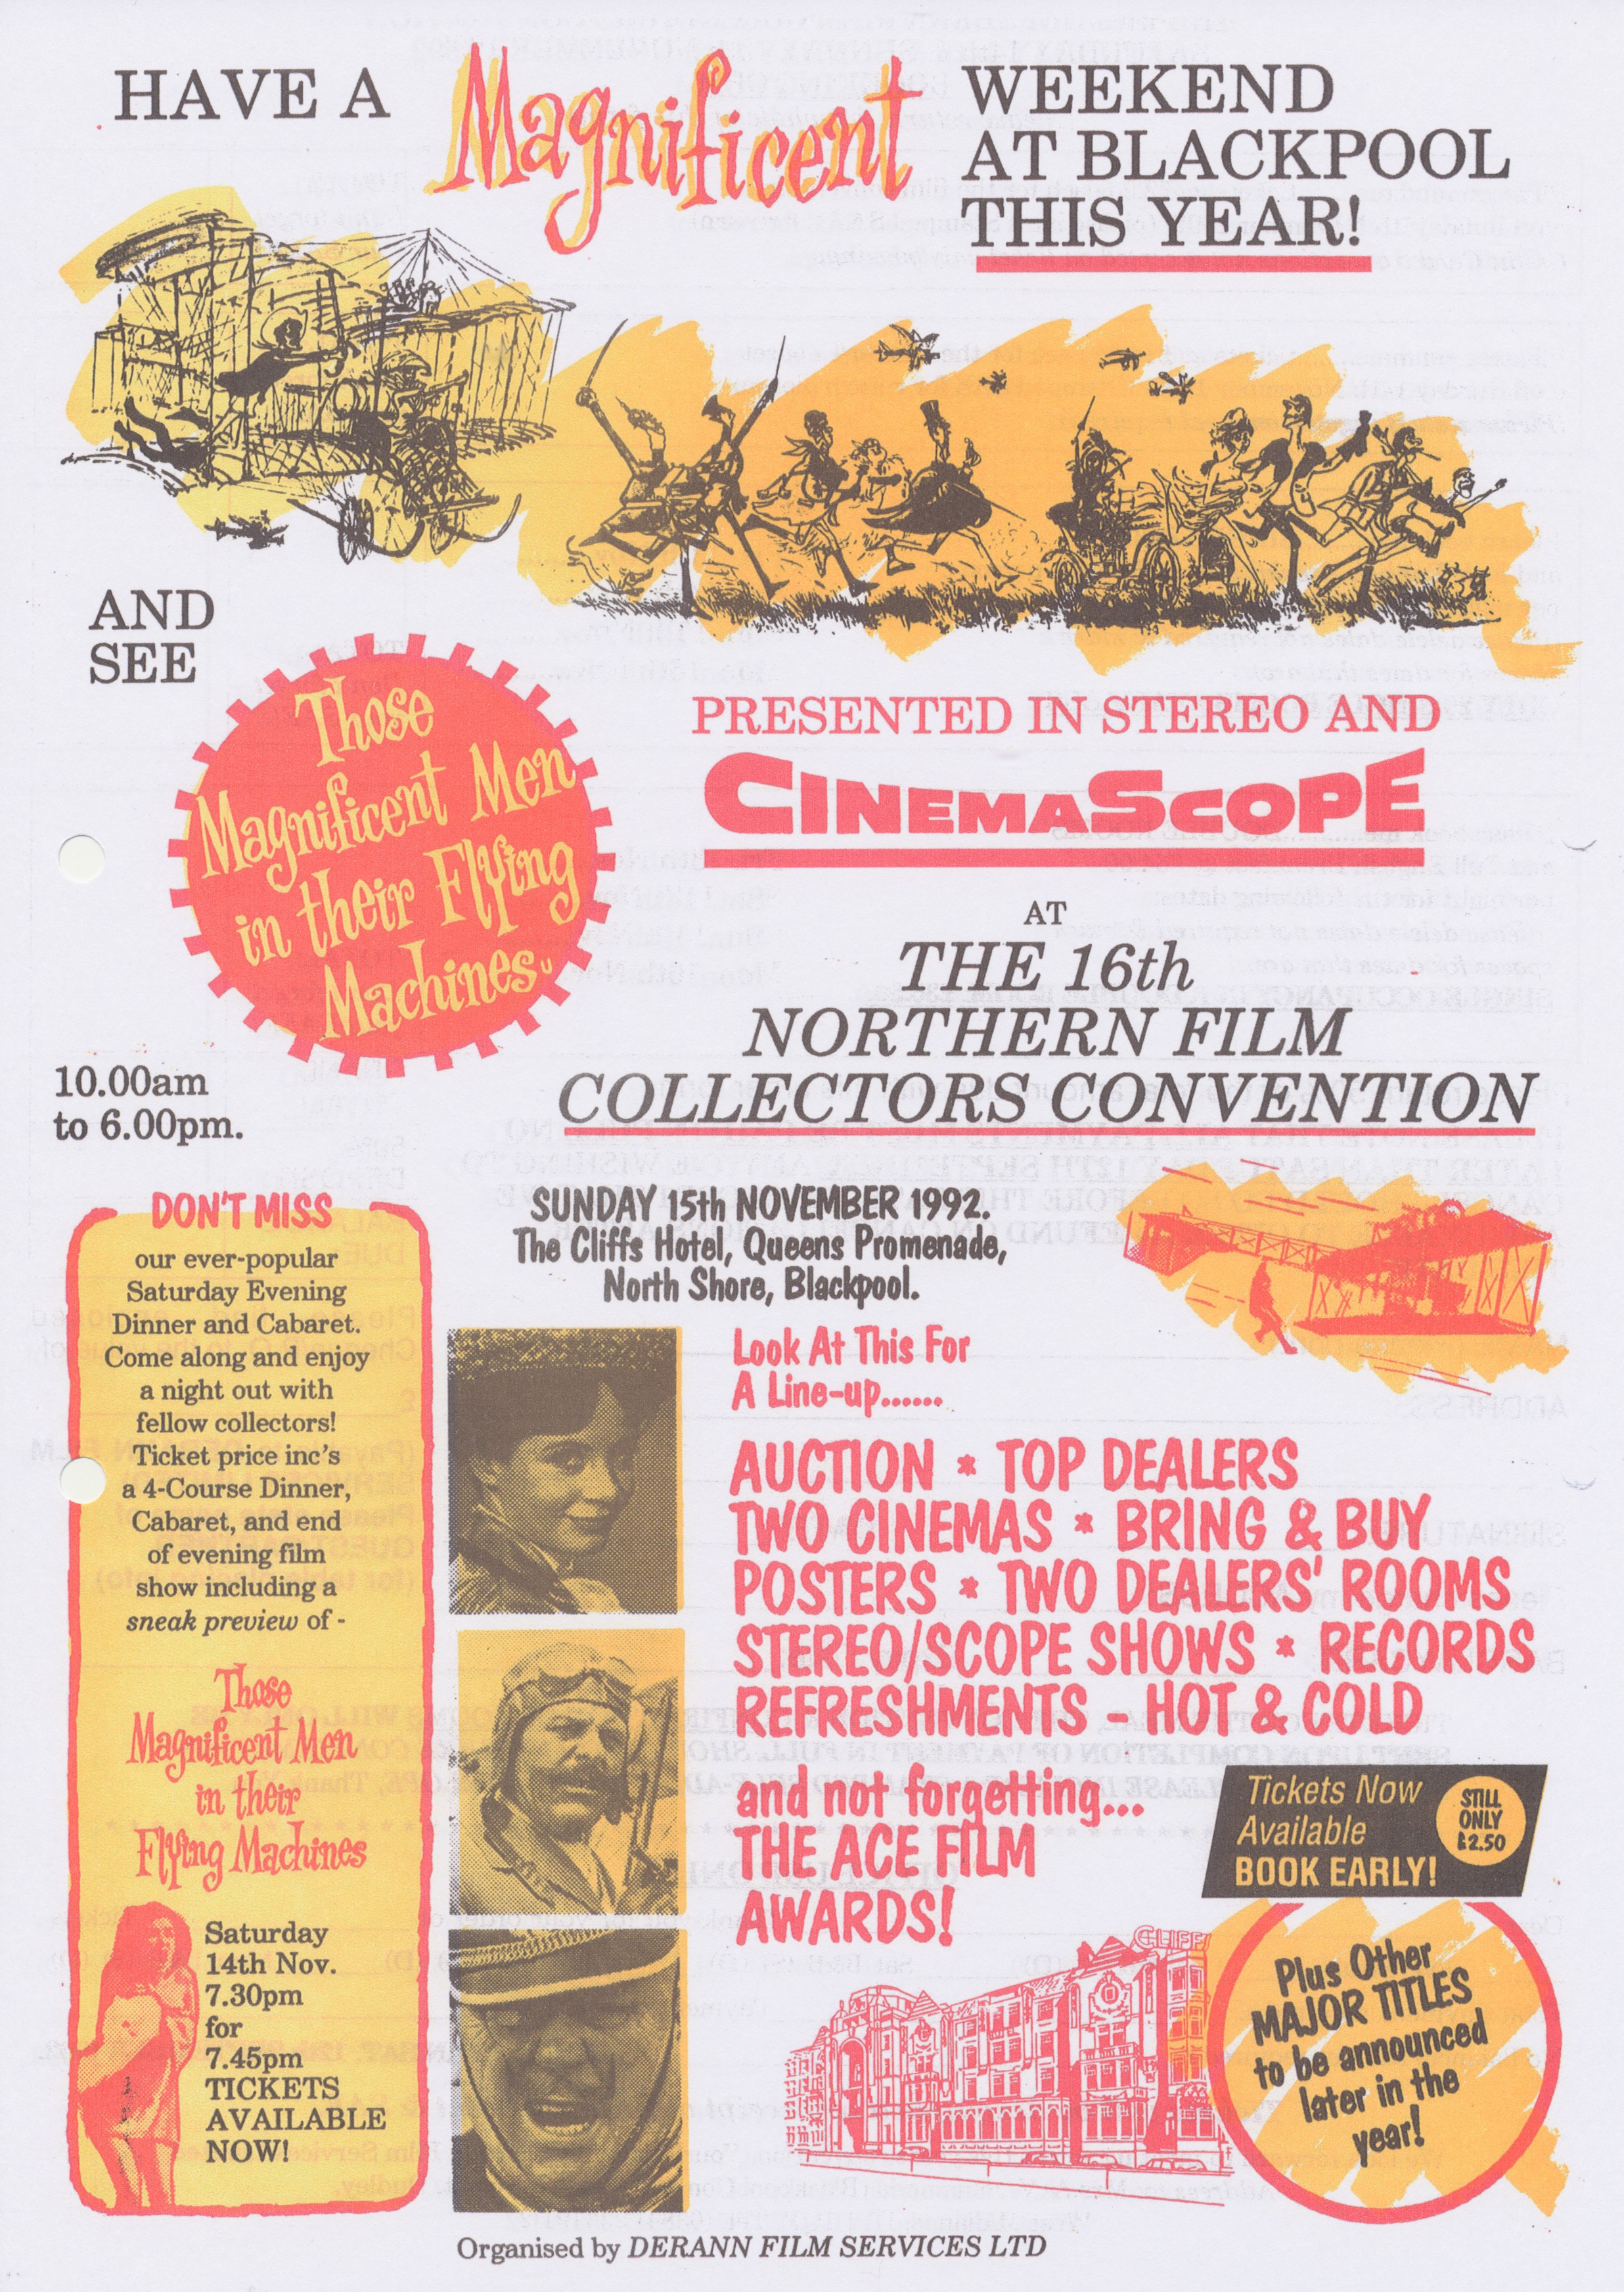 1992 Convention Booking form